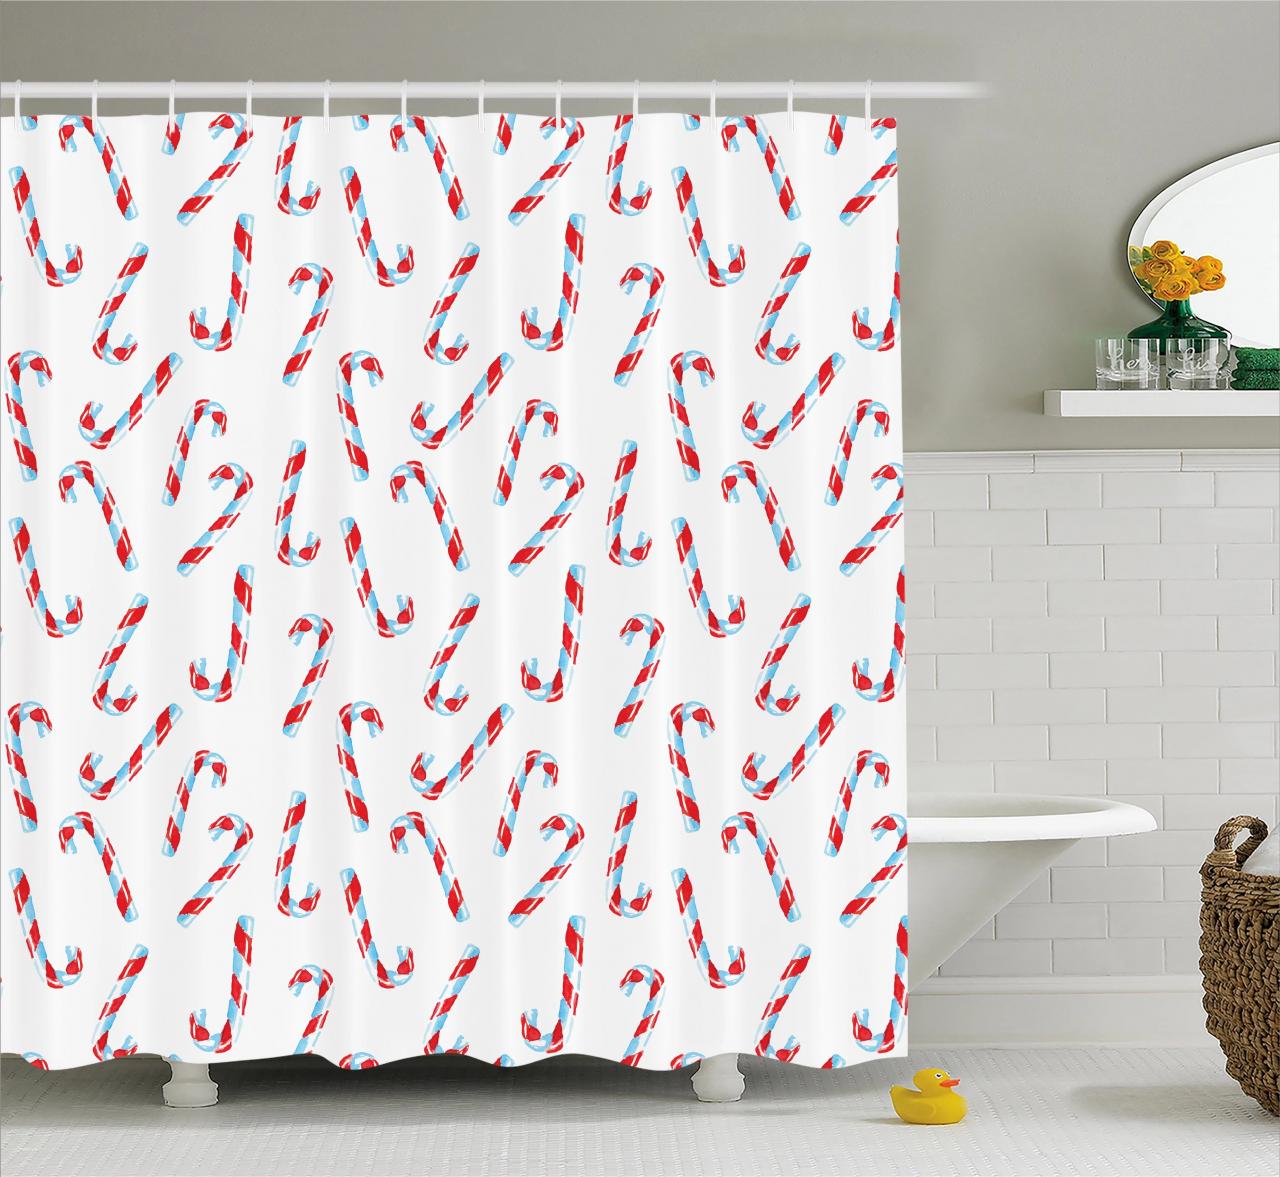 Candy Cane Shower Curtain, Aquarelle Style Sweets Traditional Christmas